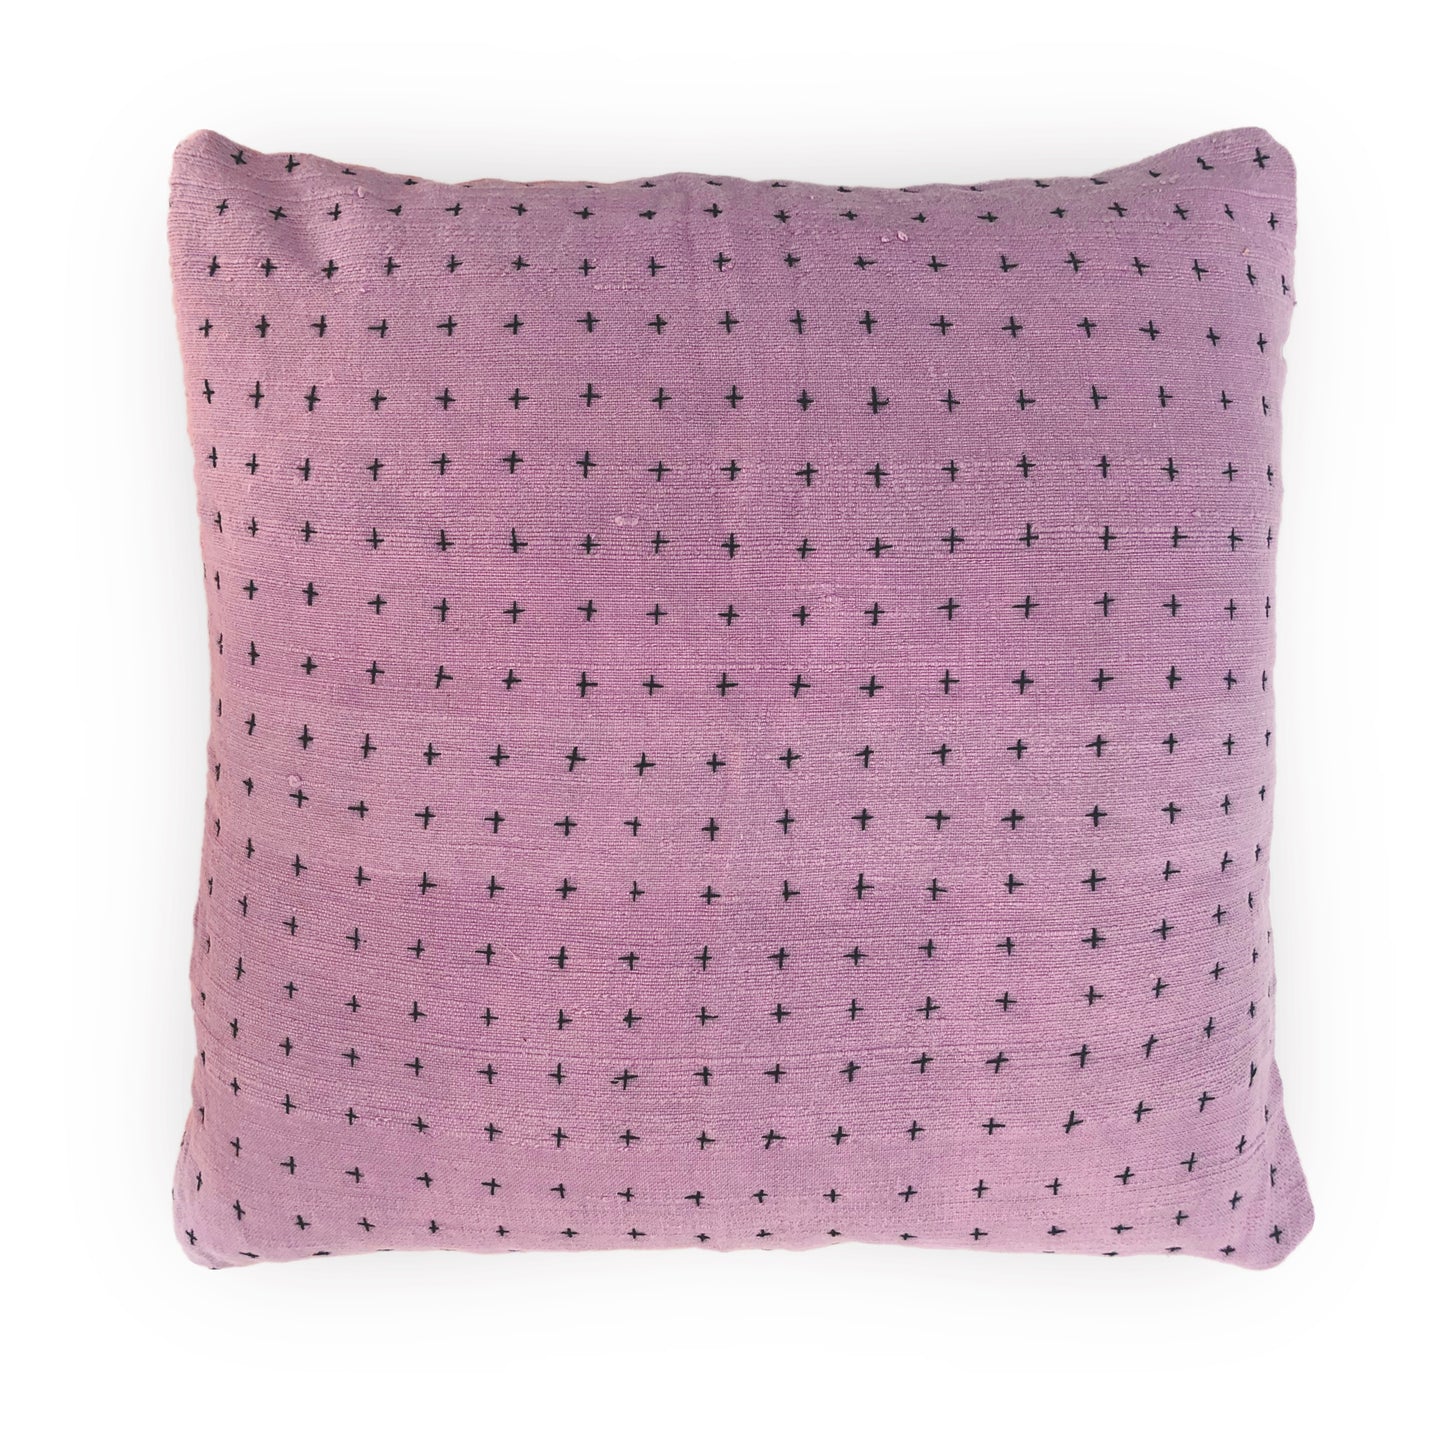 Himalayan & Lavender Pillow Cover 18x18in